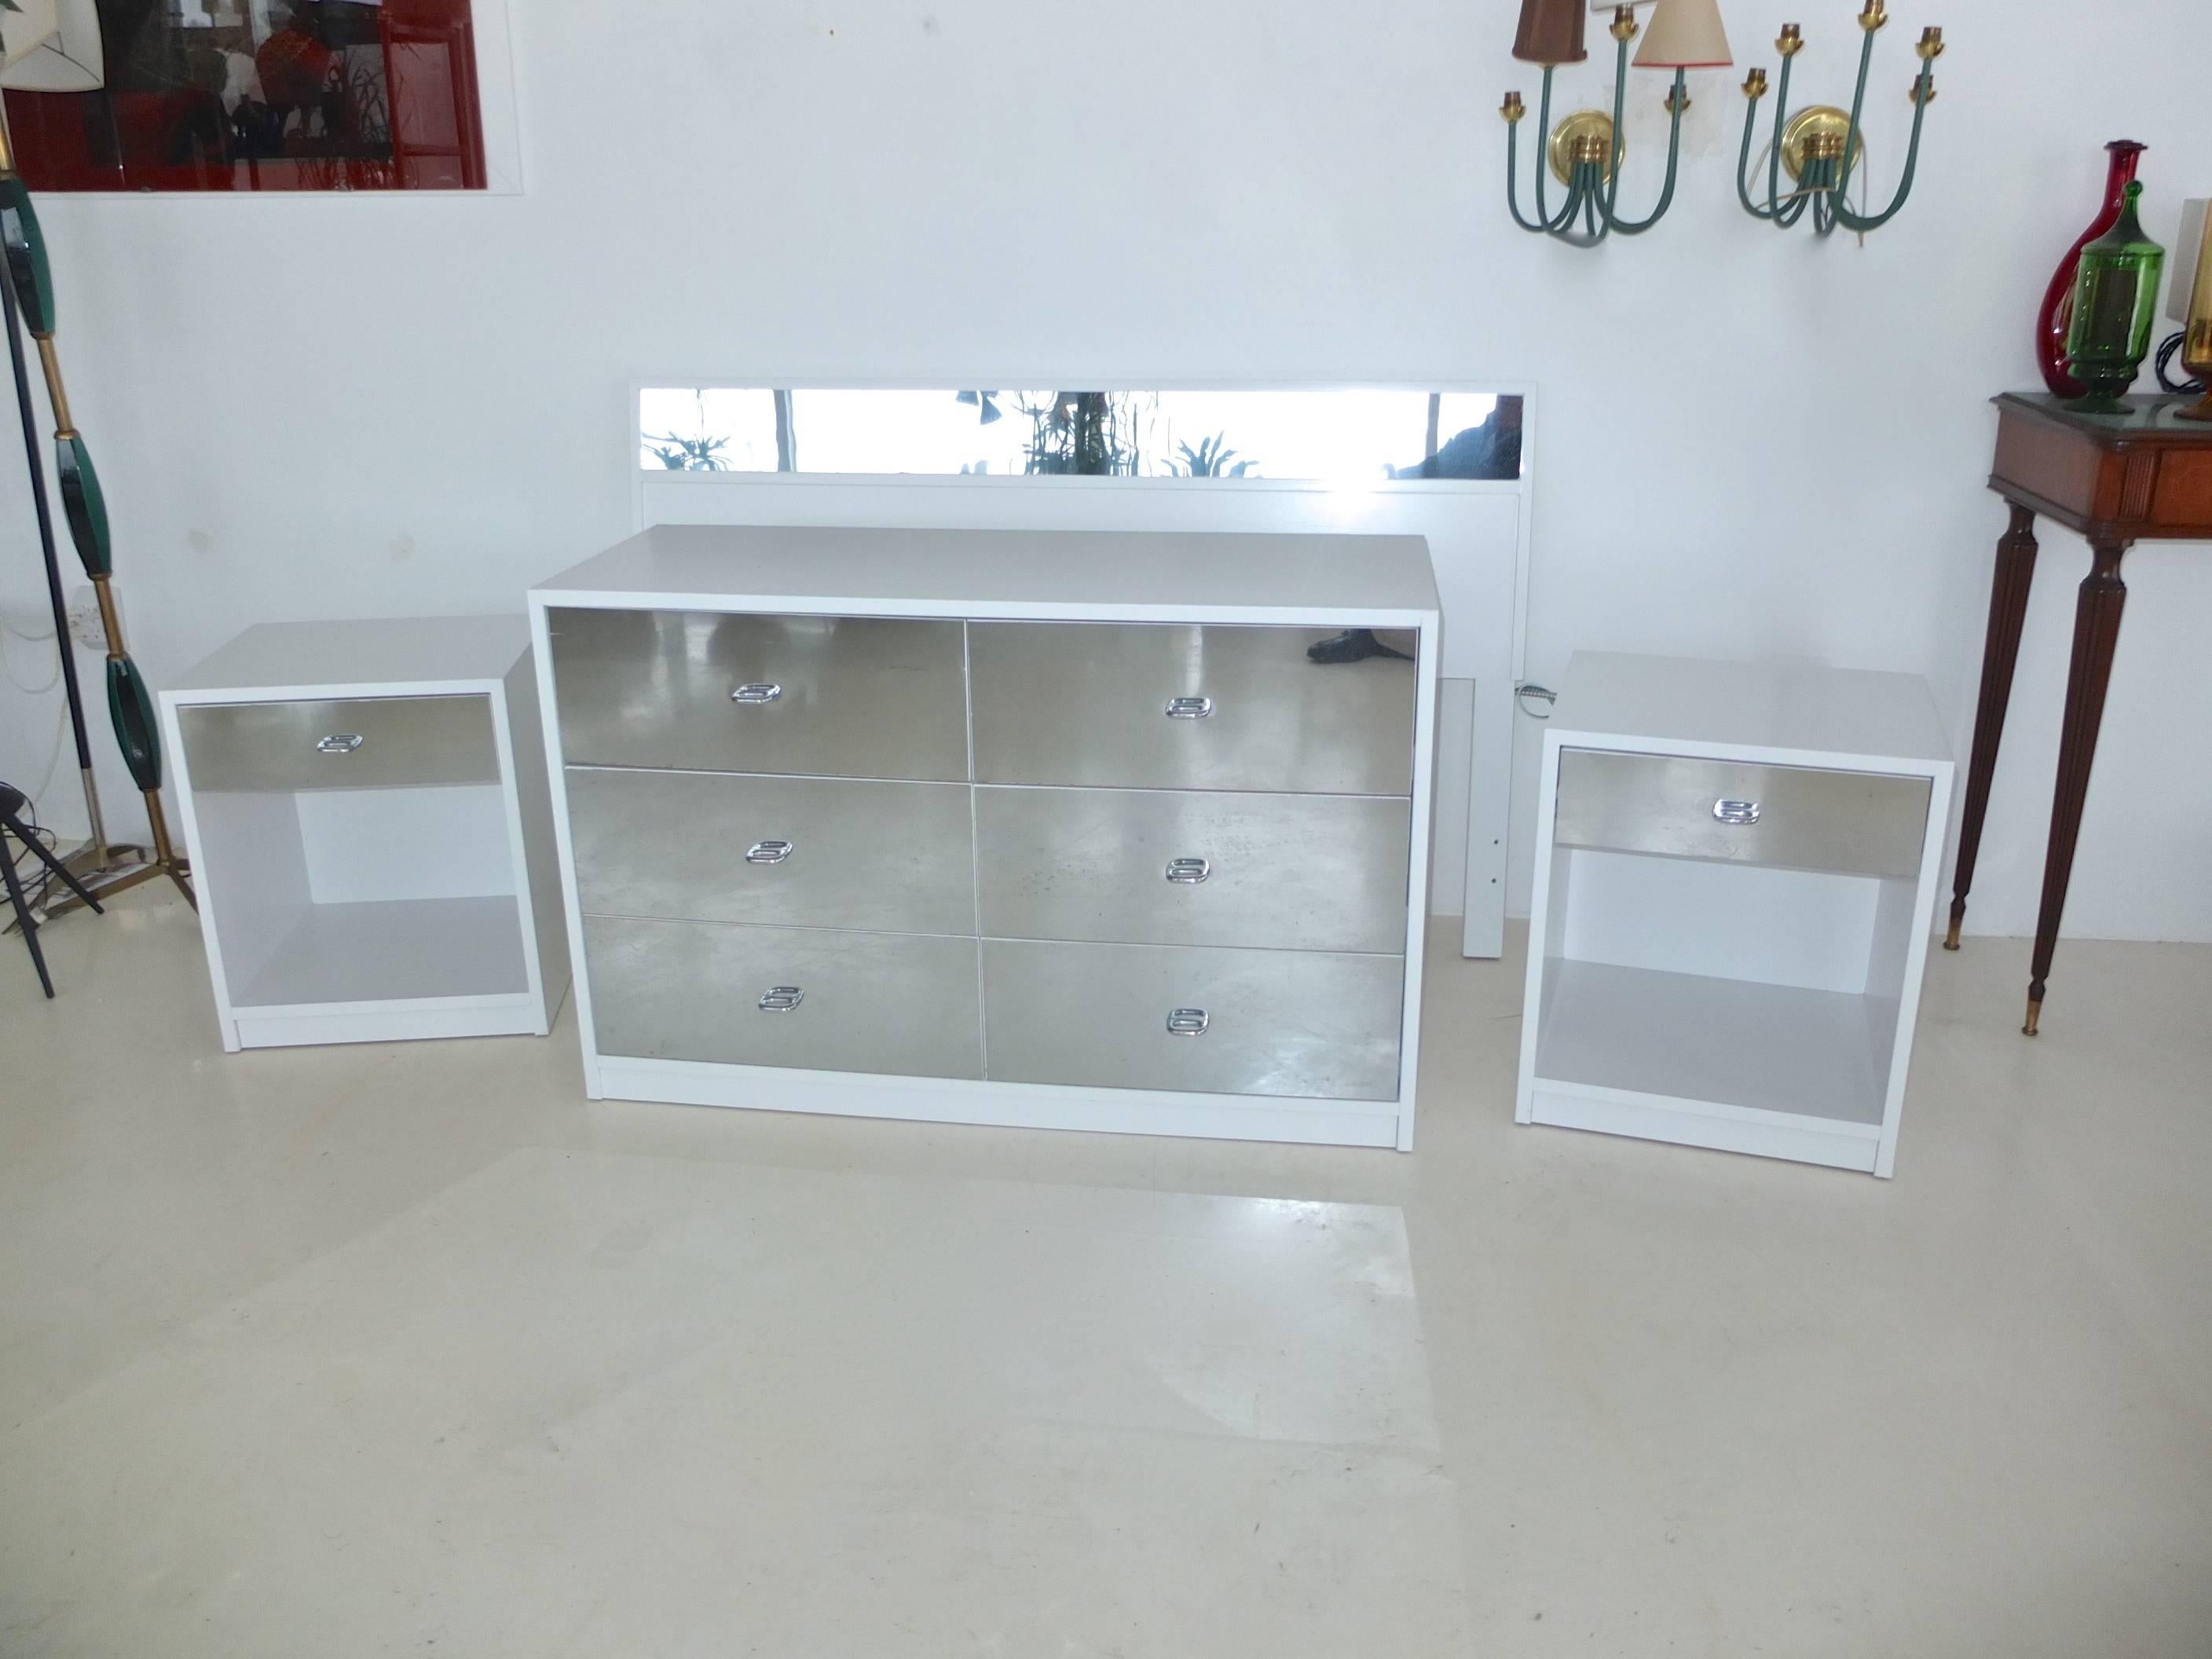 Produced in 1963 for Charak modern, a clean bedroom set with Pierre Cardin glam. Crisp white painted wood cases with mirror faced drawer fronts and headboard. Freshly repainted by professional cabinet finishers. Set consists of a Full size